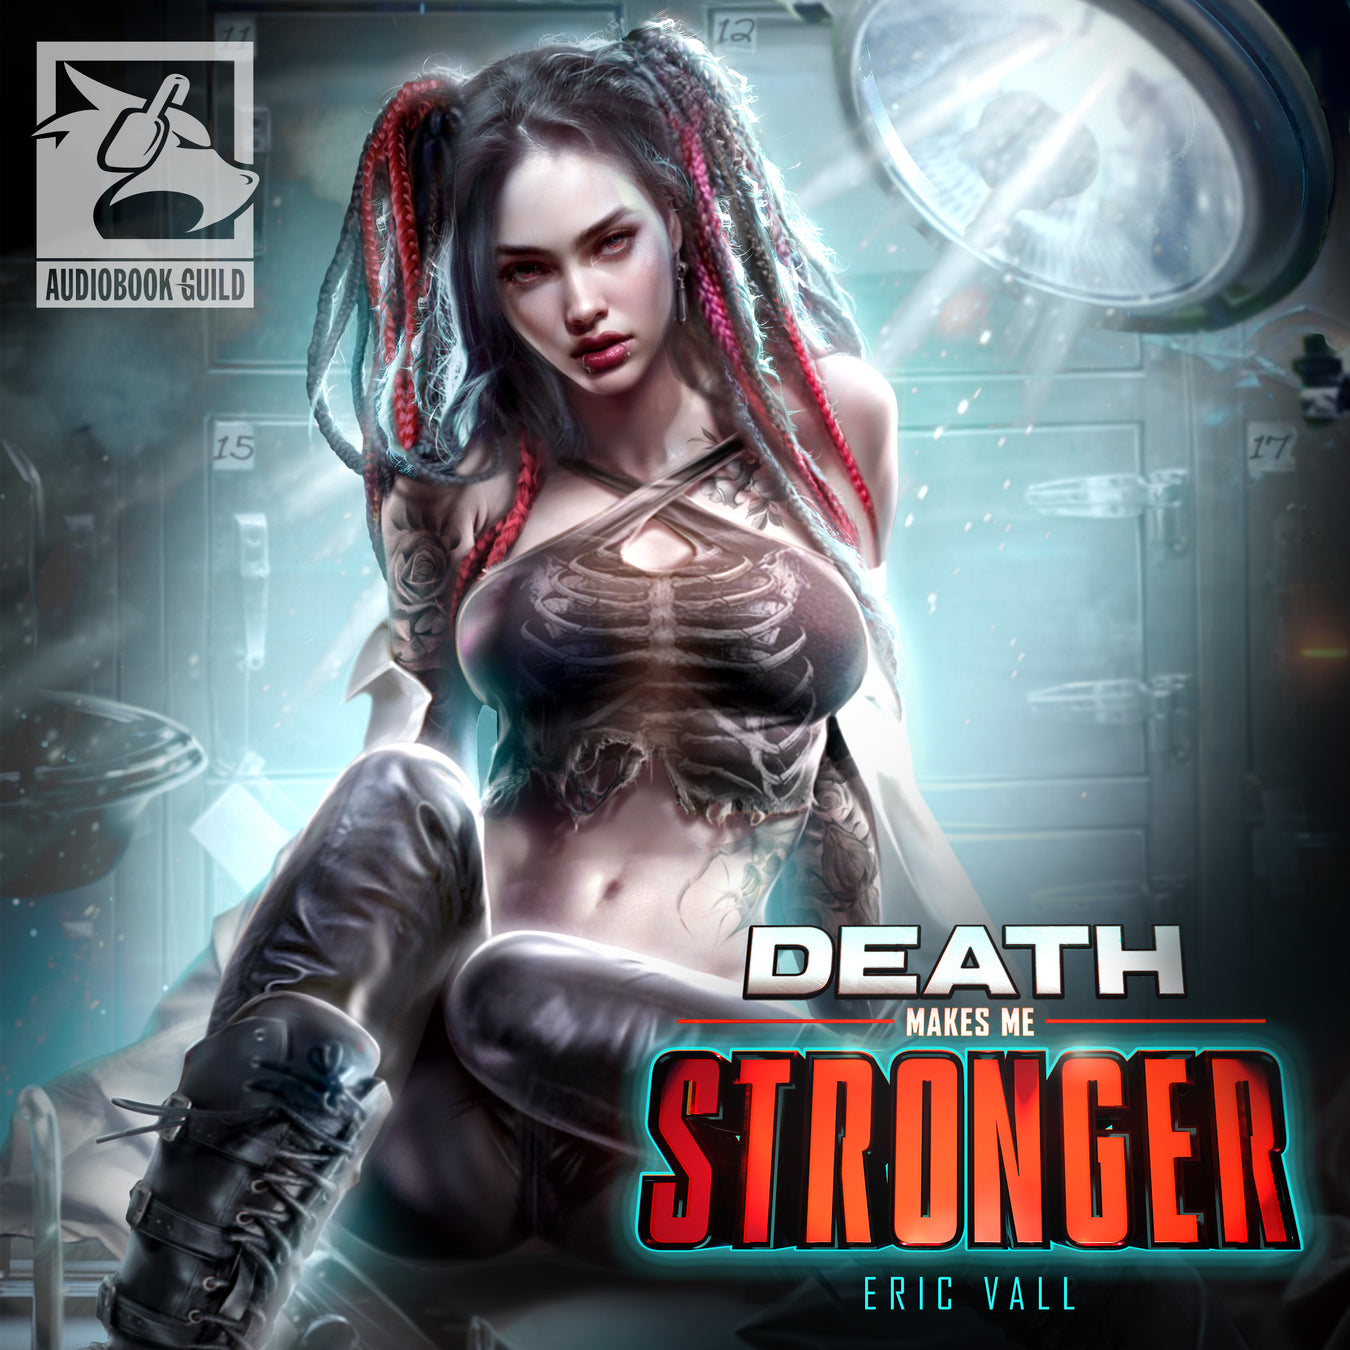 Death Makes Me Stronger by Eric Vall